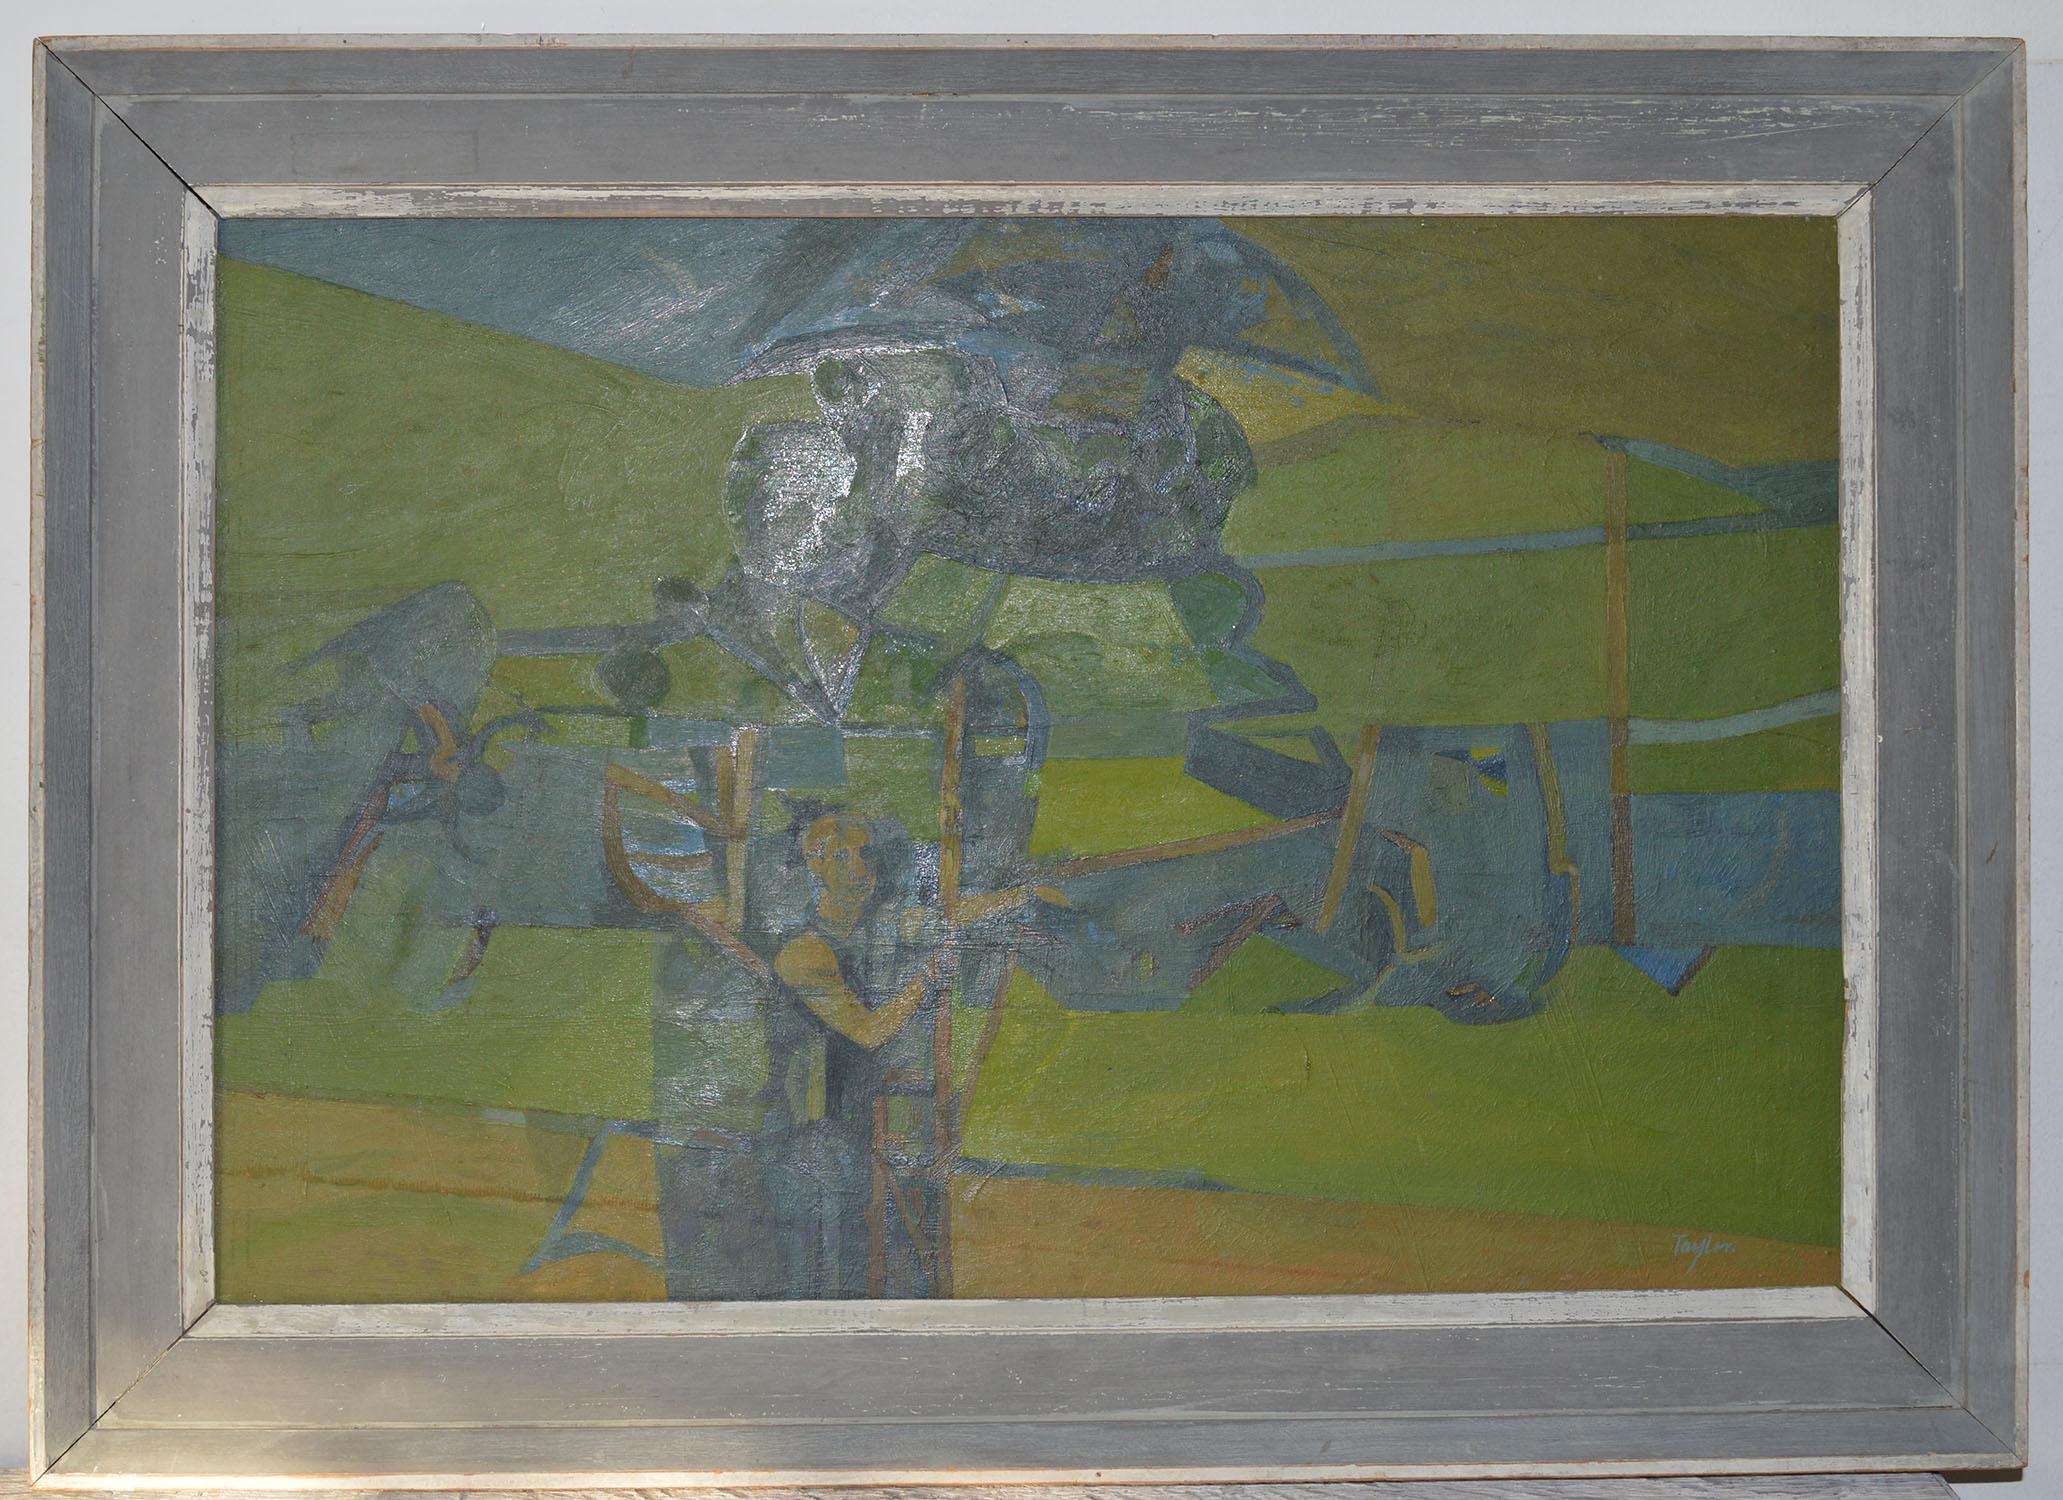 English Figure in an Abstract Landscape, A. C. Taylor, circa 1950